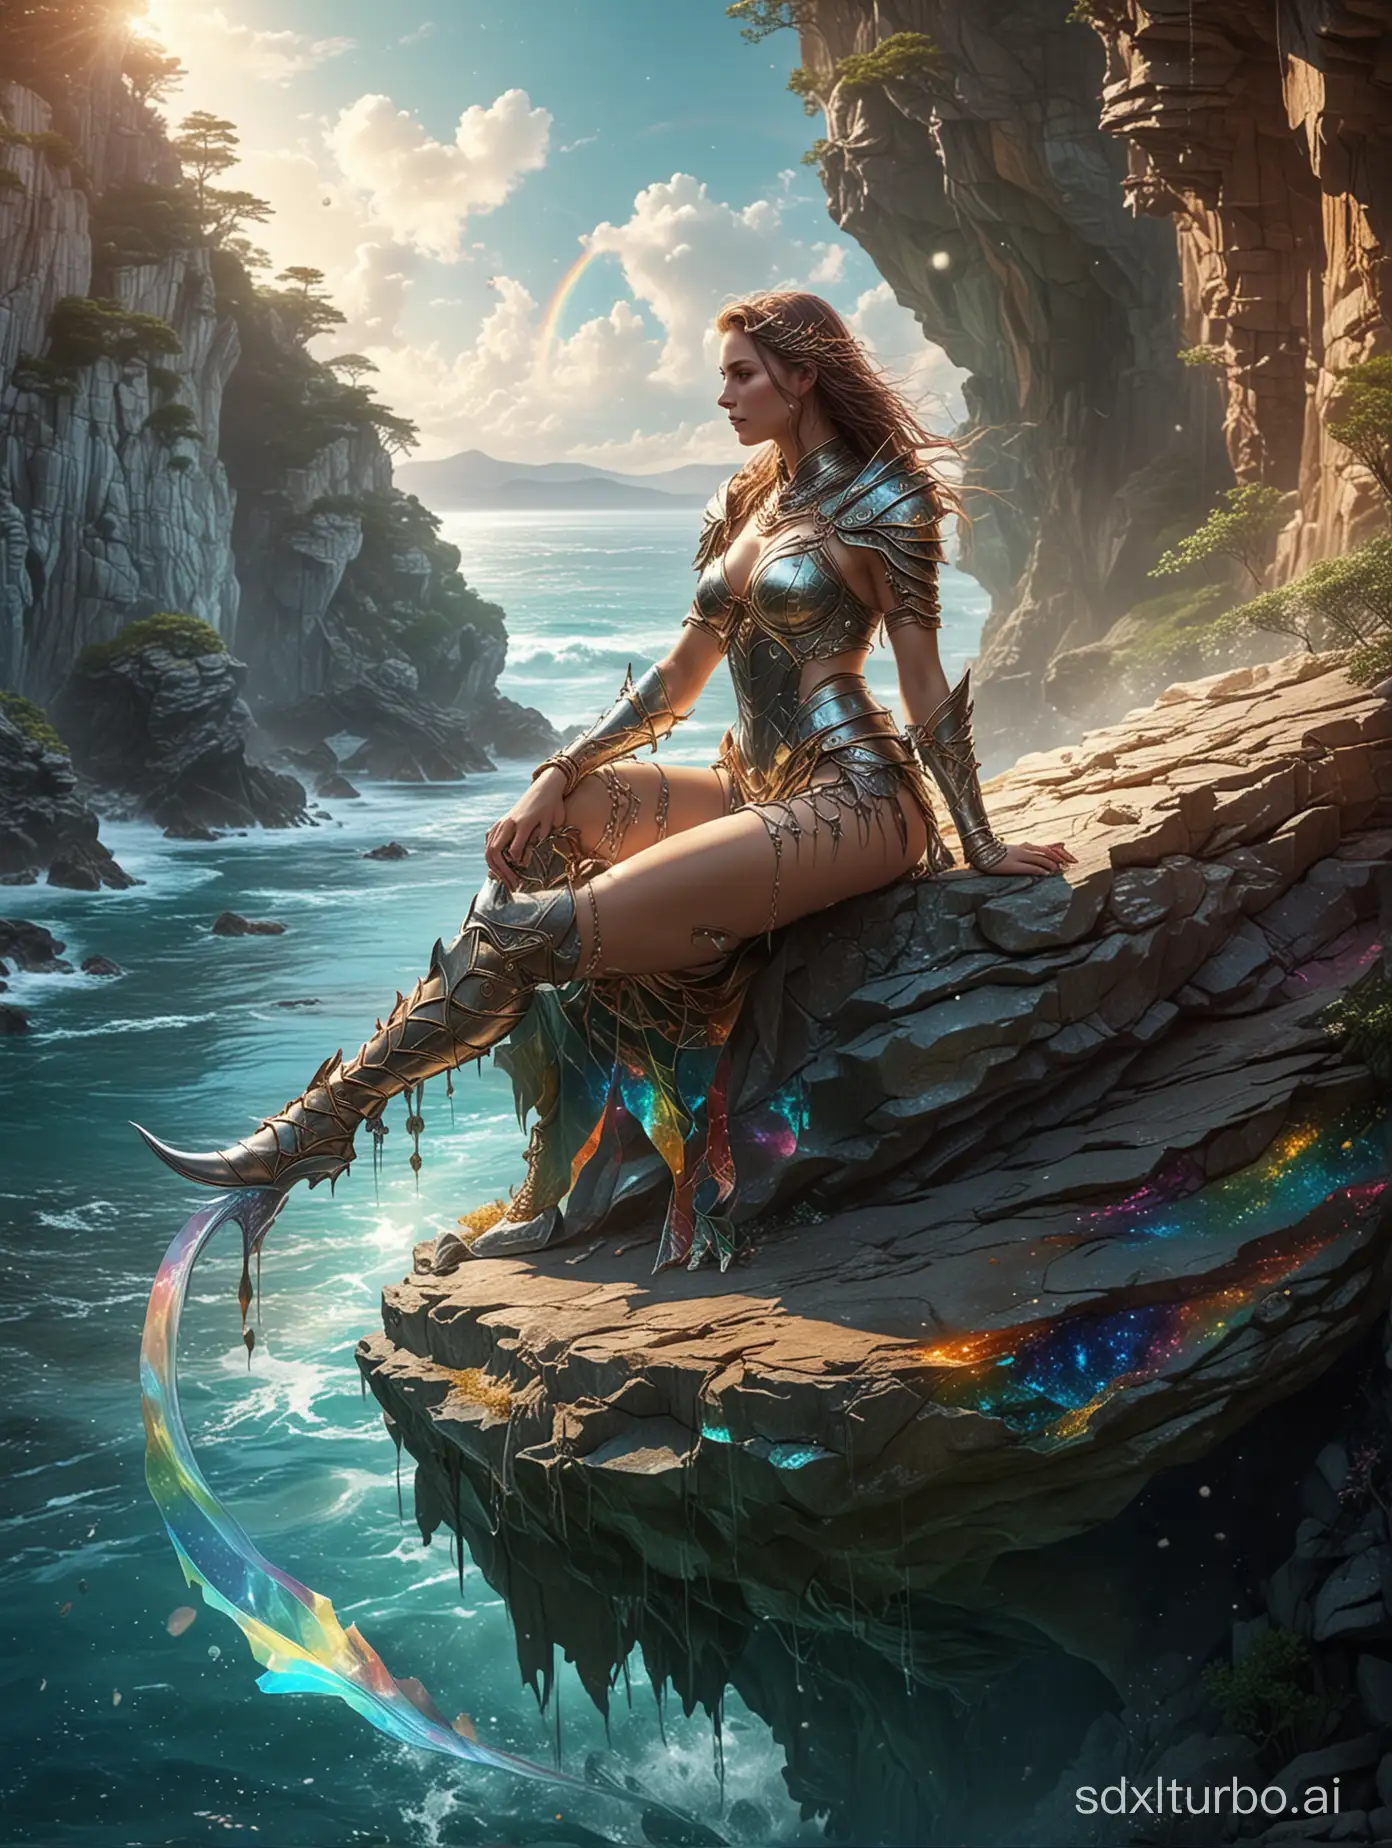 Stylish women, fantasy design, bikini armor set, mythical warrior princess, fantasy elements, forged metal with dragon scale texture, light flowing lines and rainbow in space, magic forest environment, seated on the edge of the cliff, crystal-clear sea water, rough sea, relax and peaceful, retro